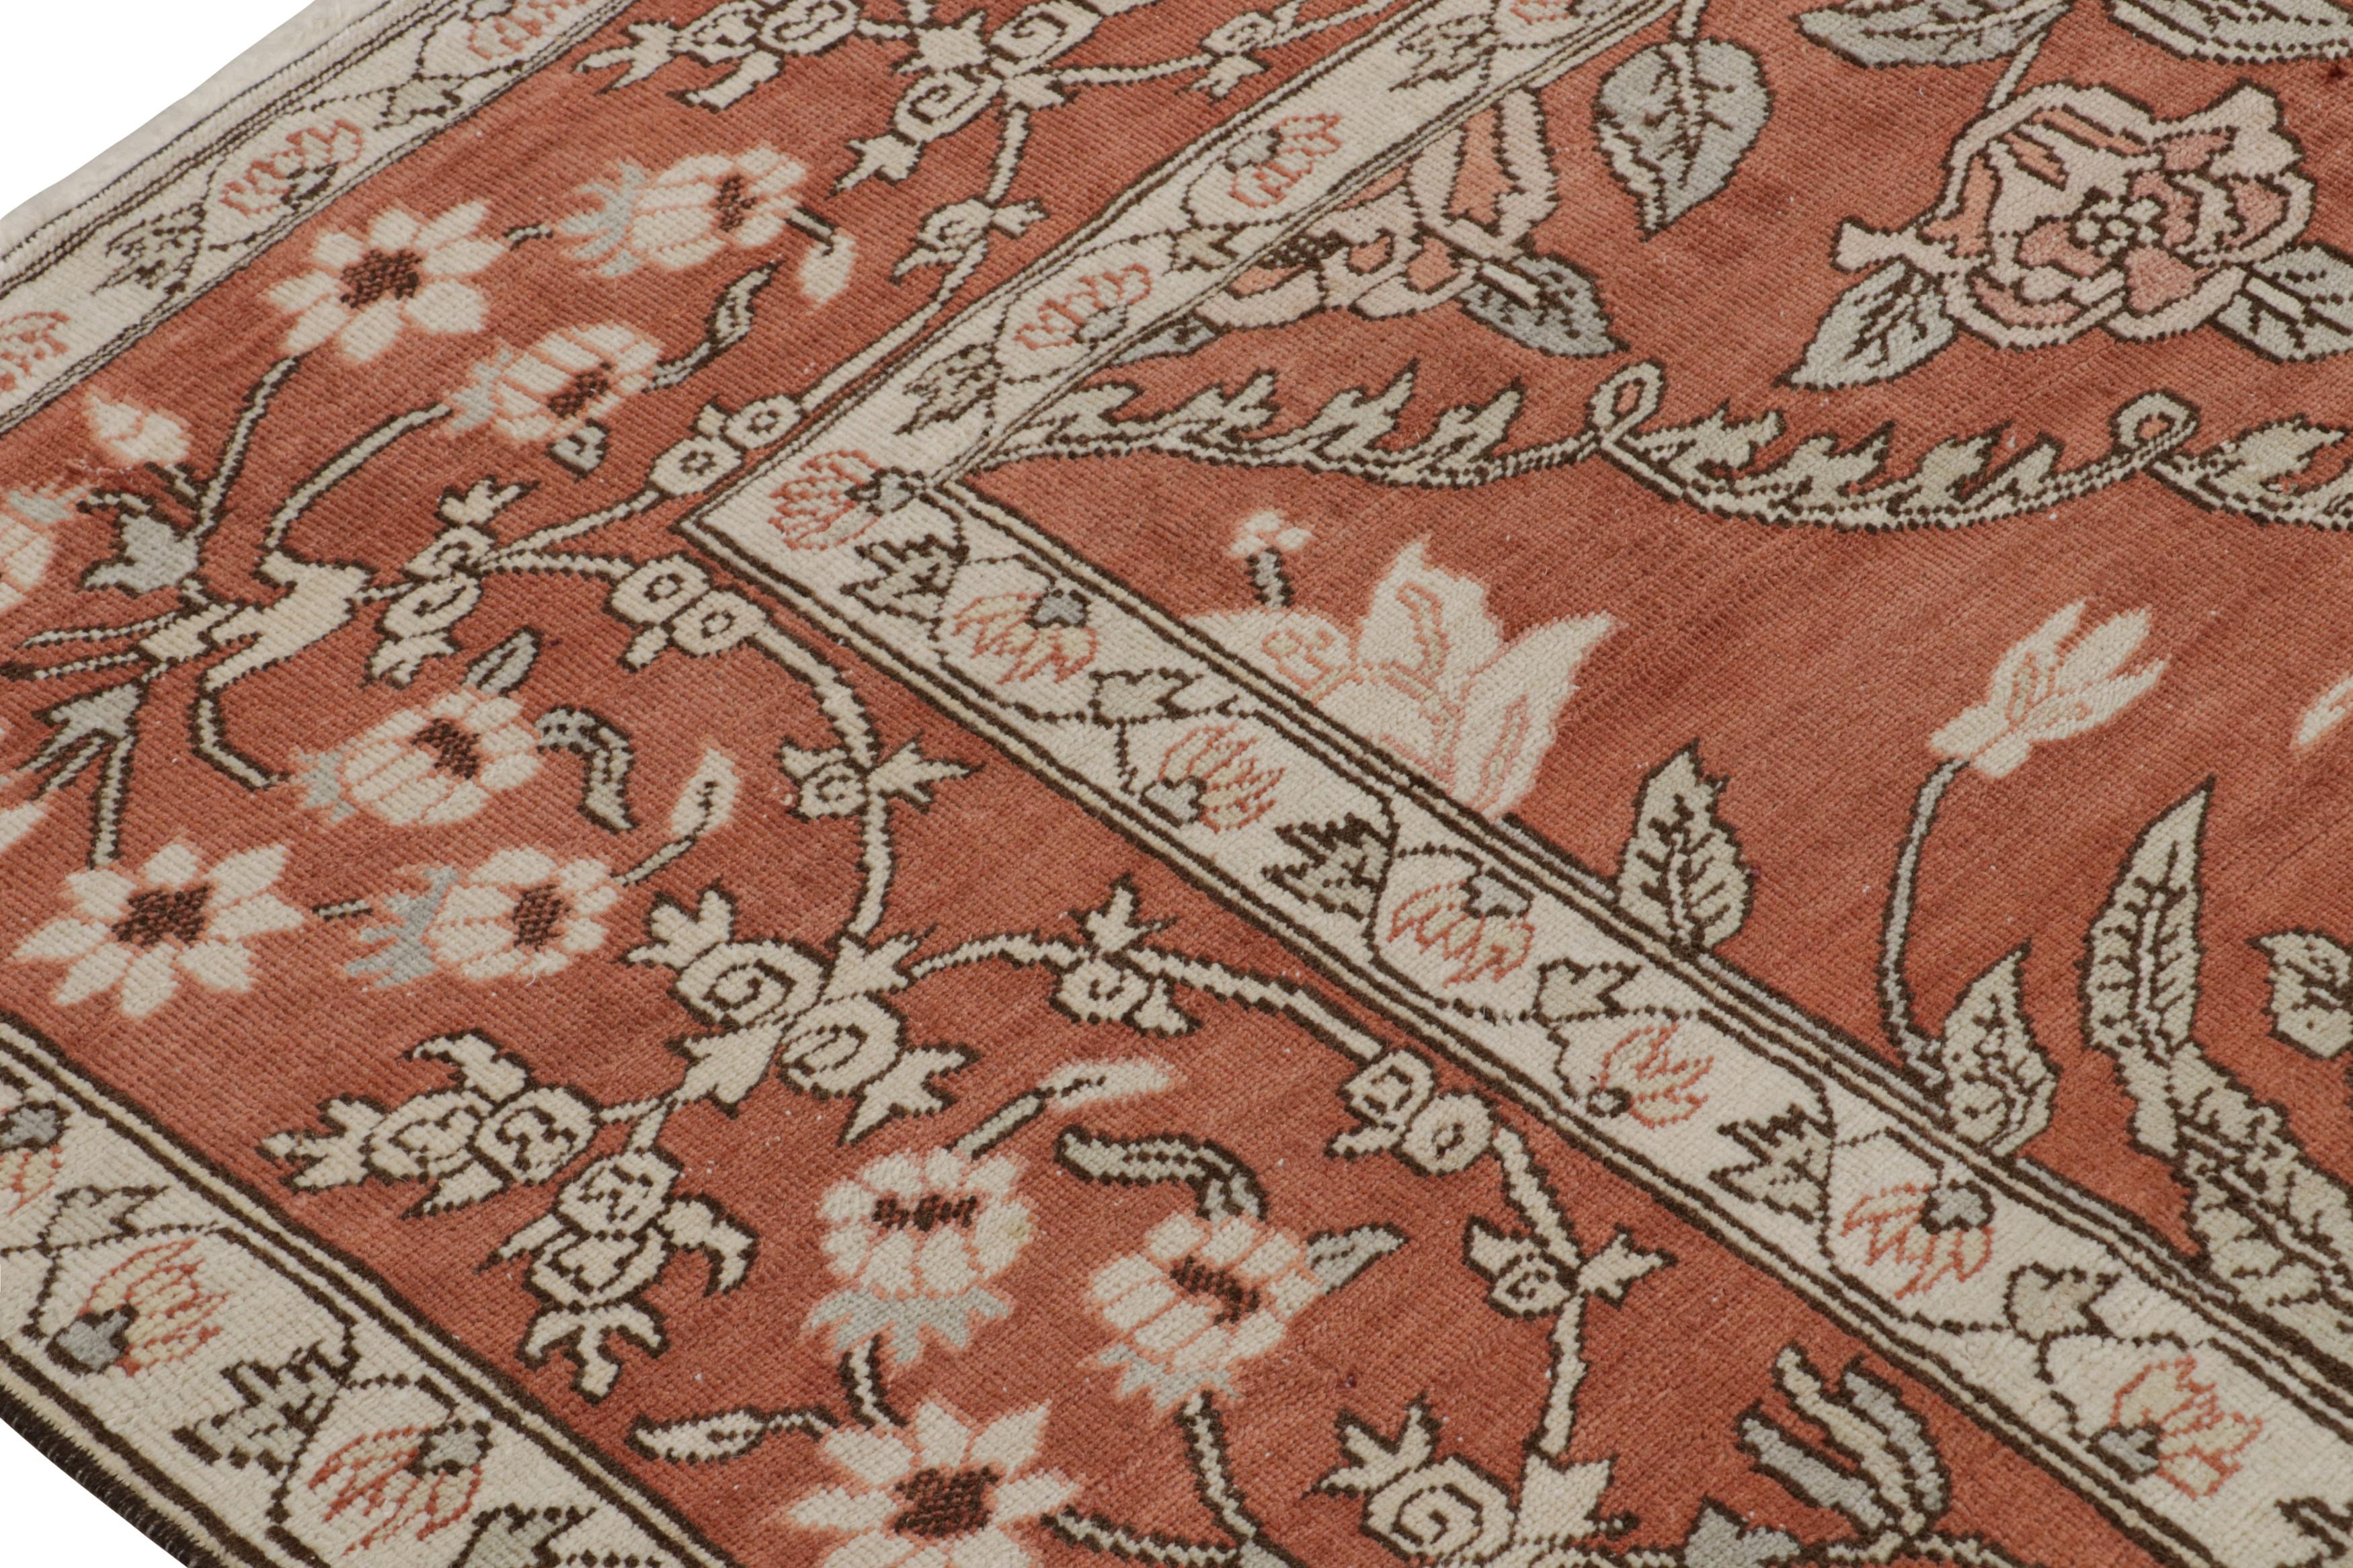 Rug & Kilim’s 17th Century Mogul Style Rug in Red with Beige Floral Patterns In New Condition For Sale In Long Island City, NY